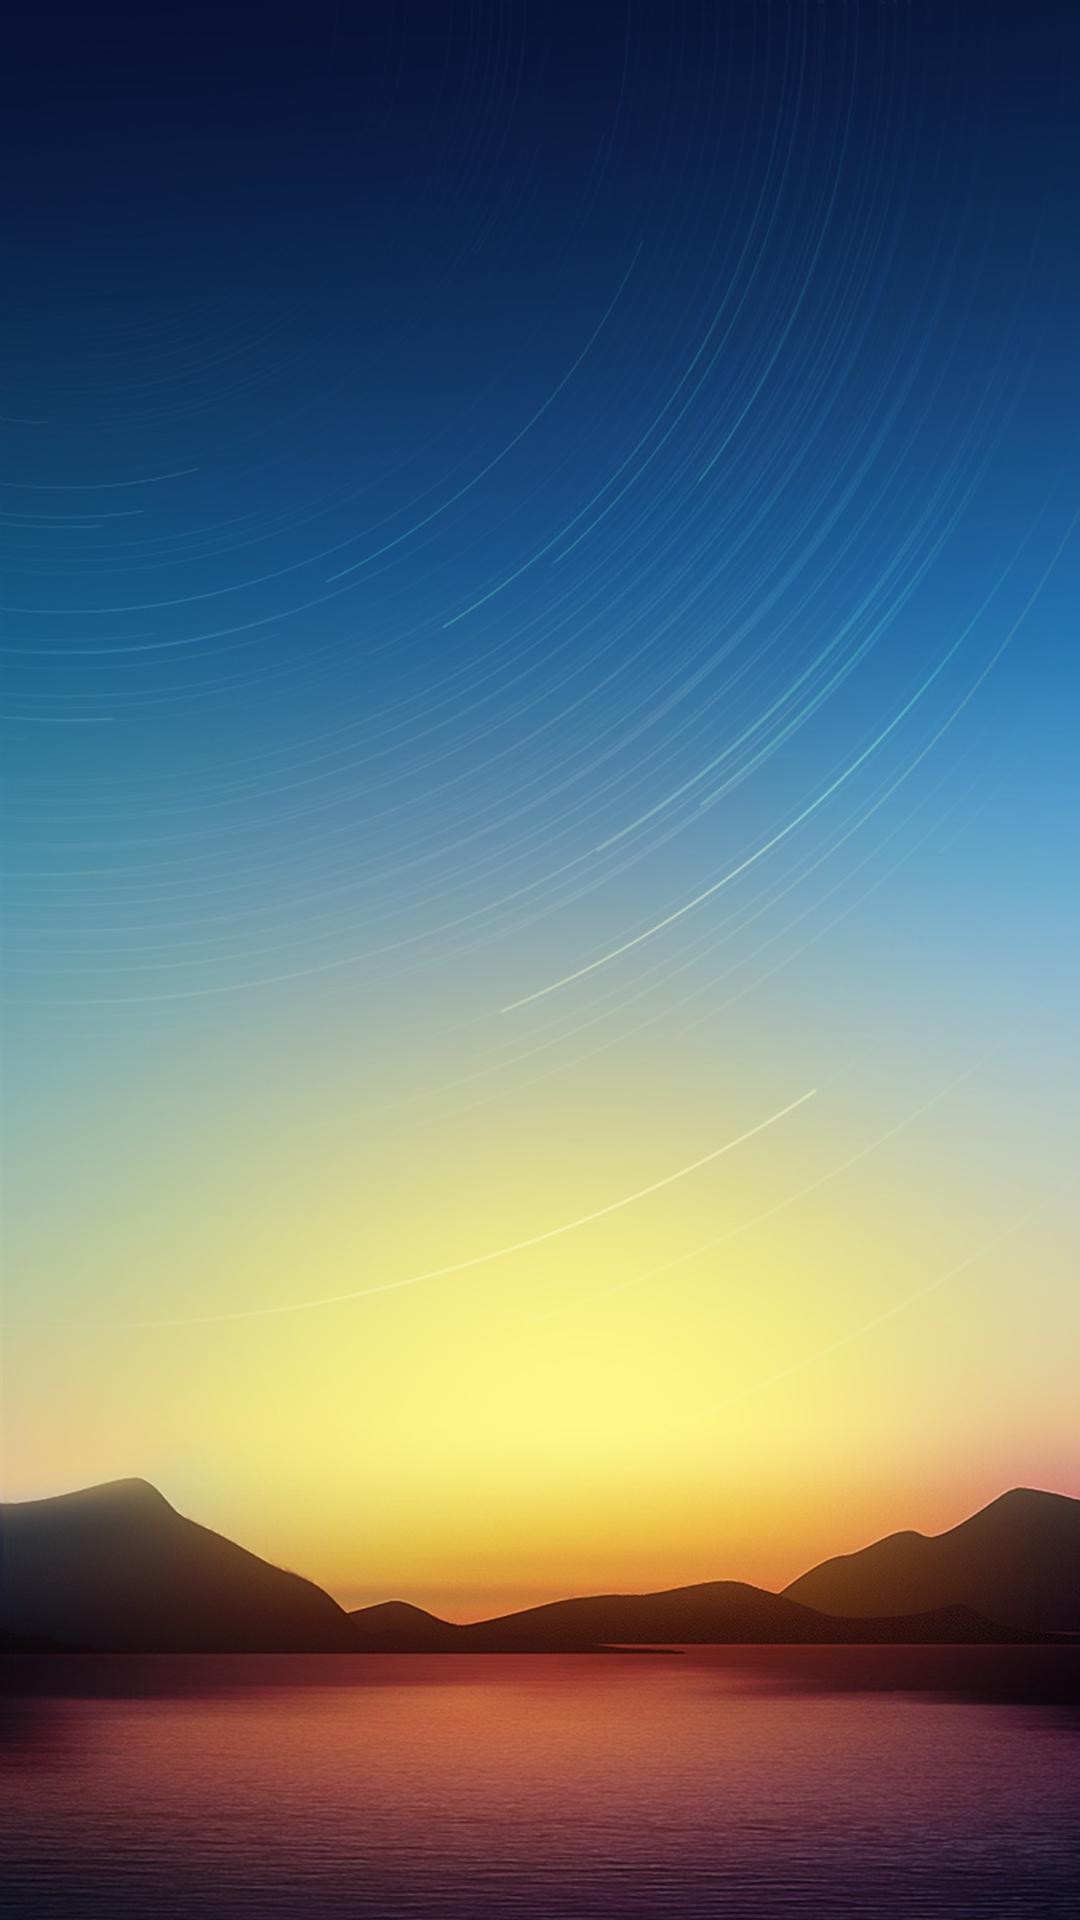 Sunset Galaxy S4 Wallpapers HD 42, HD, Galaxy S4 Wallpapers, S4